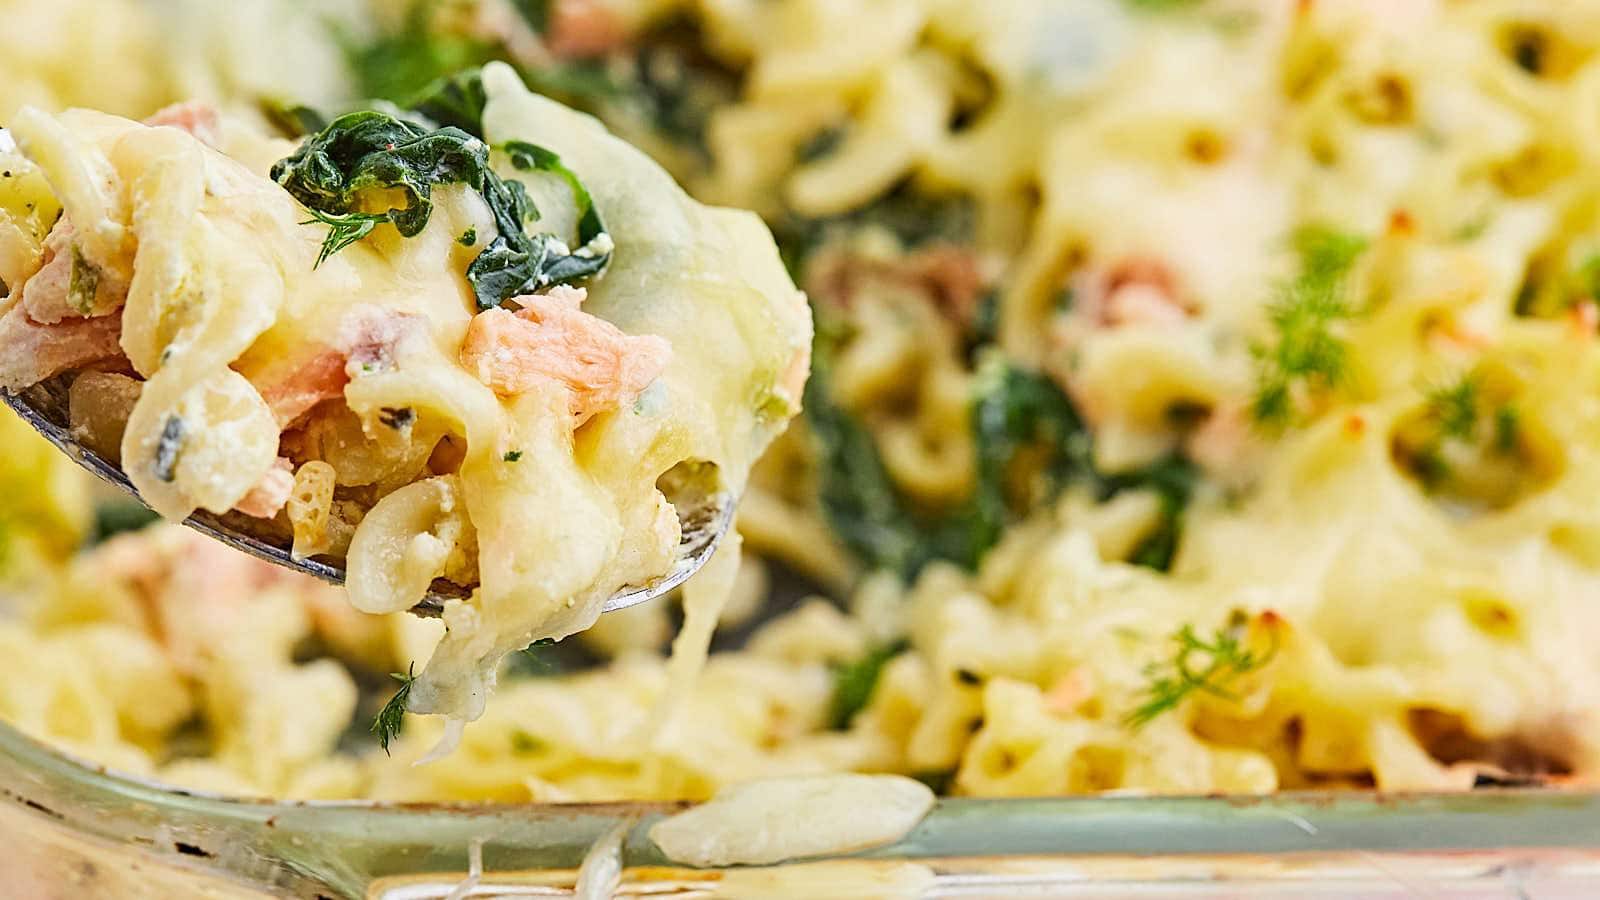 Salmon Casserole recipe by Cheerful Cook.